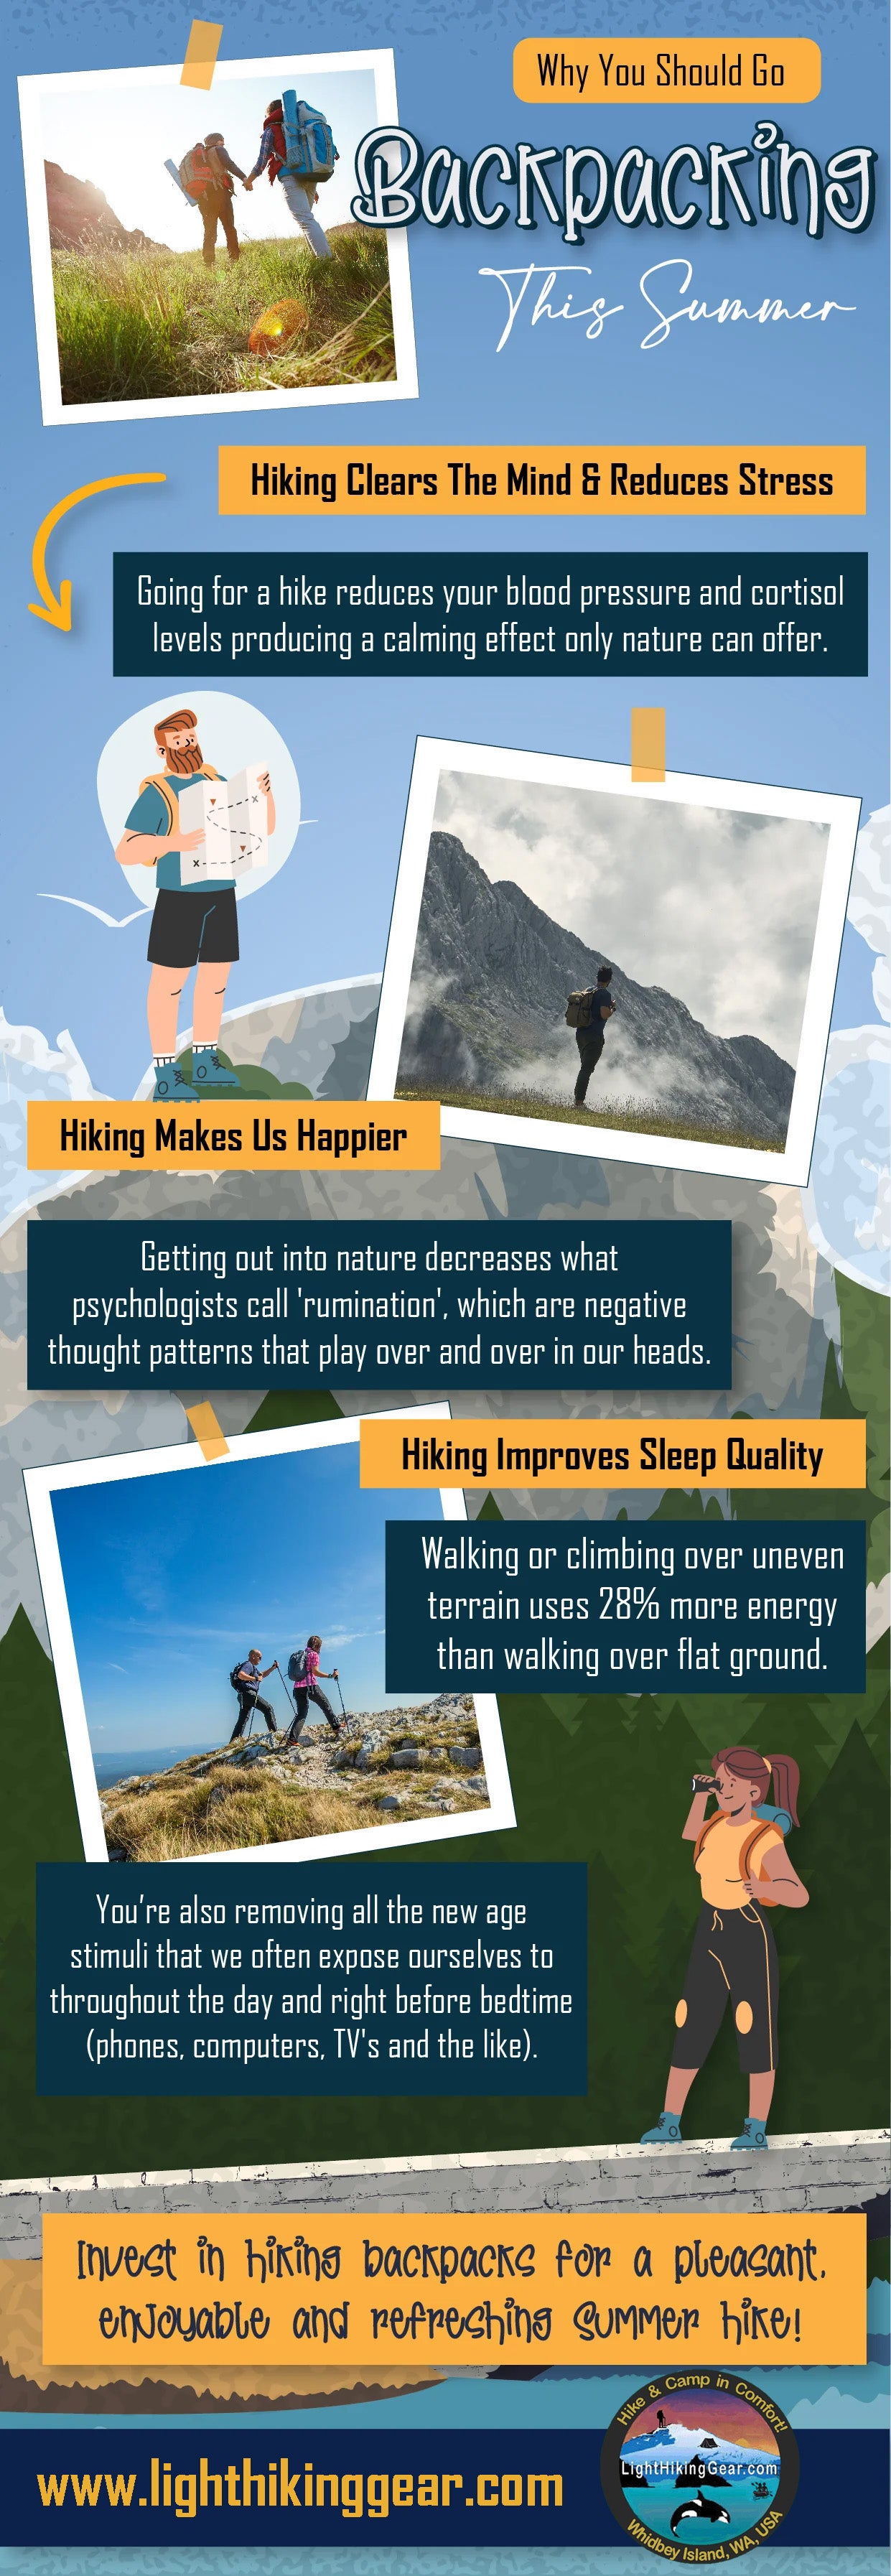 Why You Should Go Backpacking This Summer | Infographic